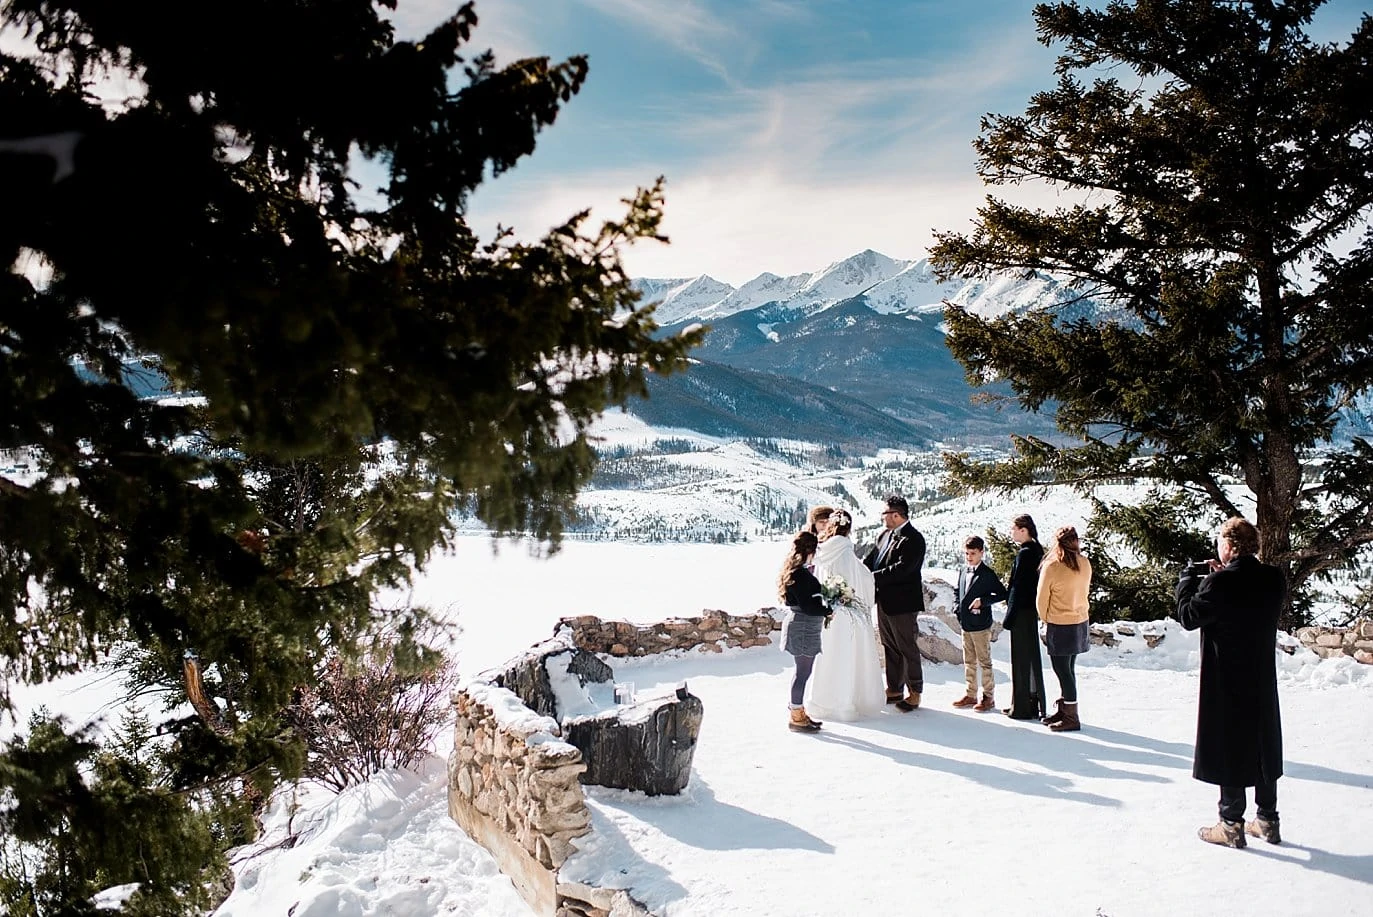 Intimate family wedding ceremony at Sapphire Point Elopement by Vail wedding photographer Jennie Crate Photographer